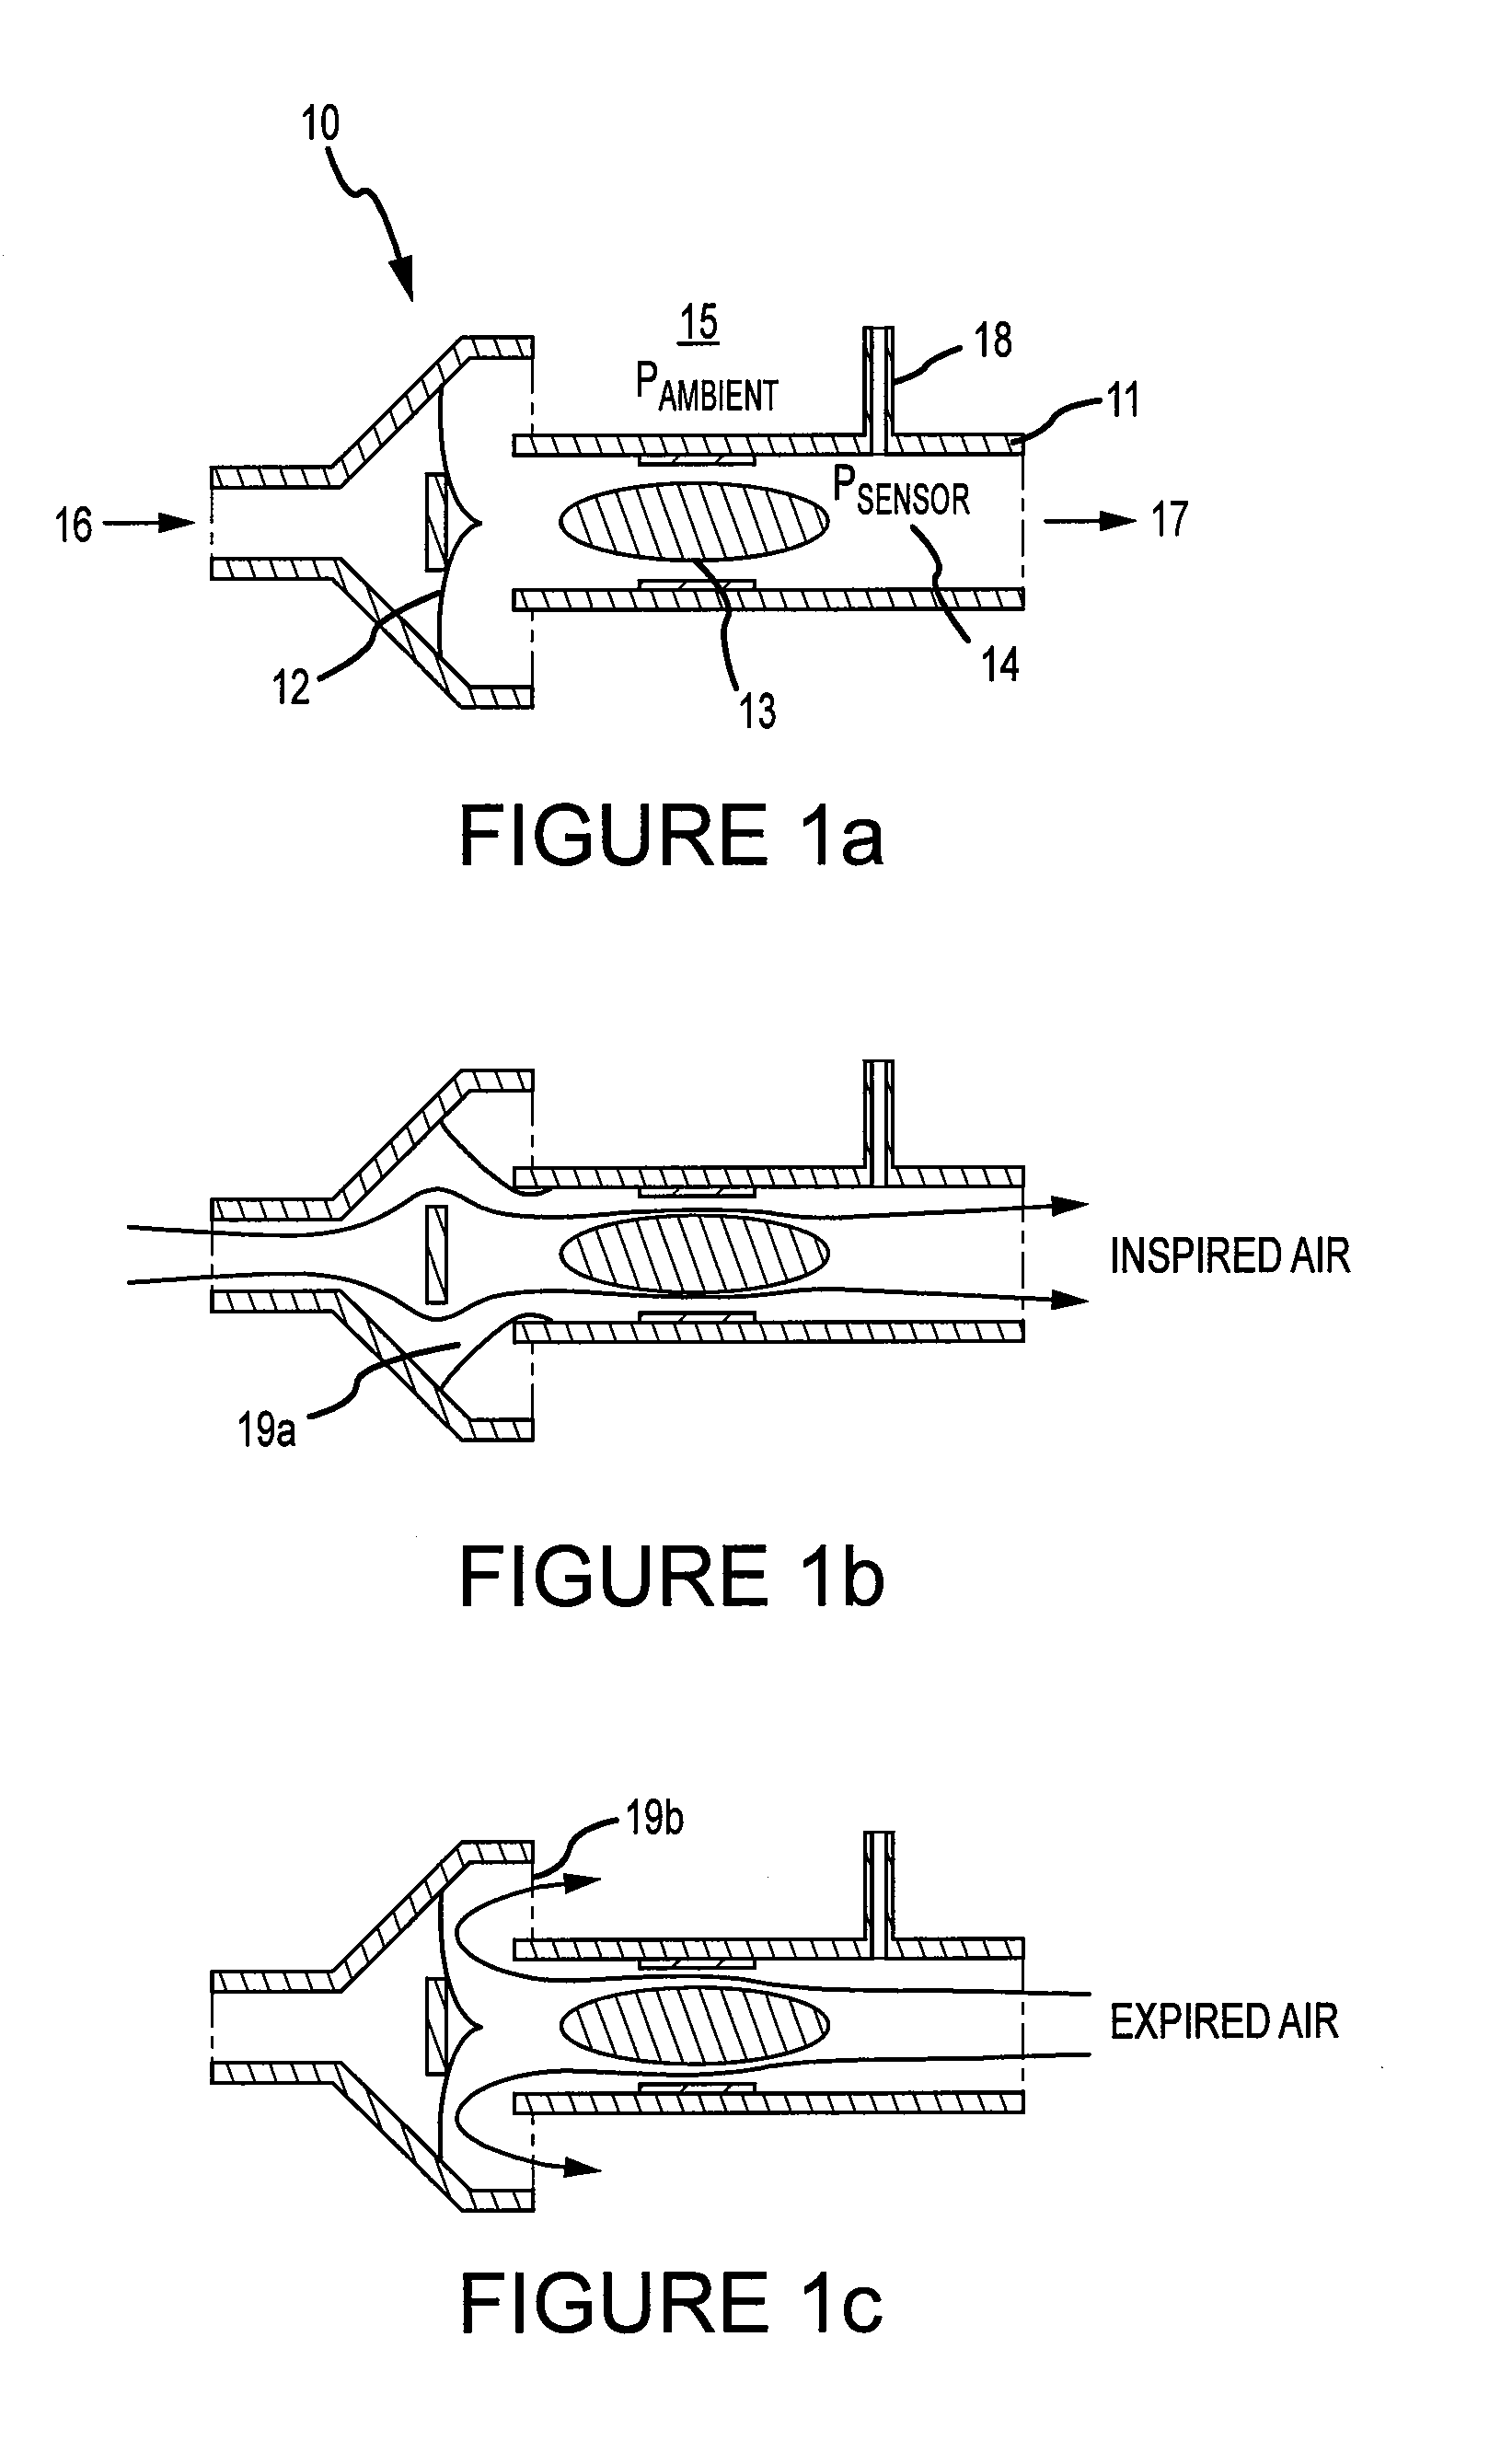 Method and apparatus for monitoring respiration